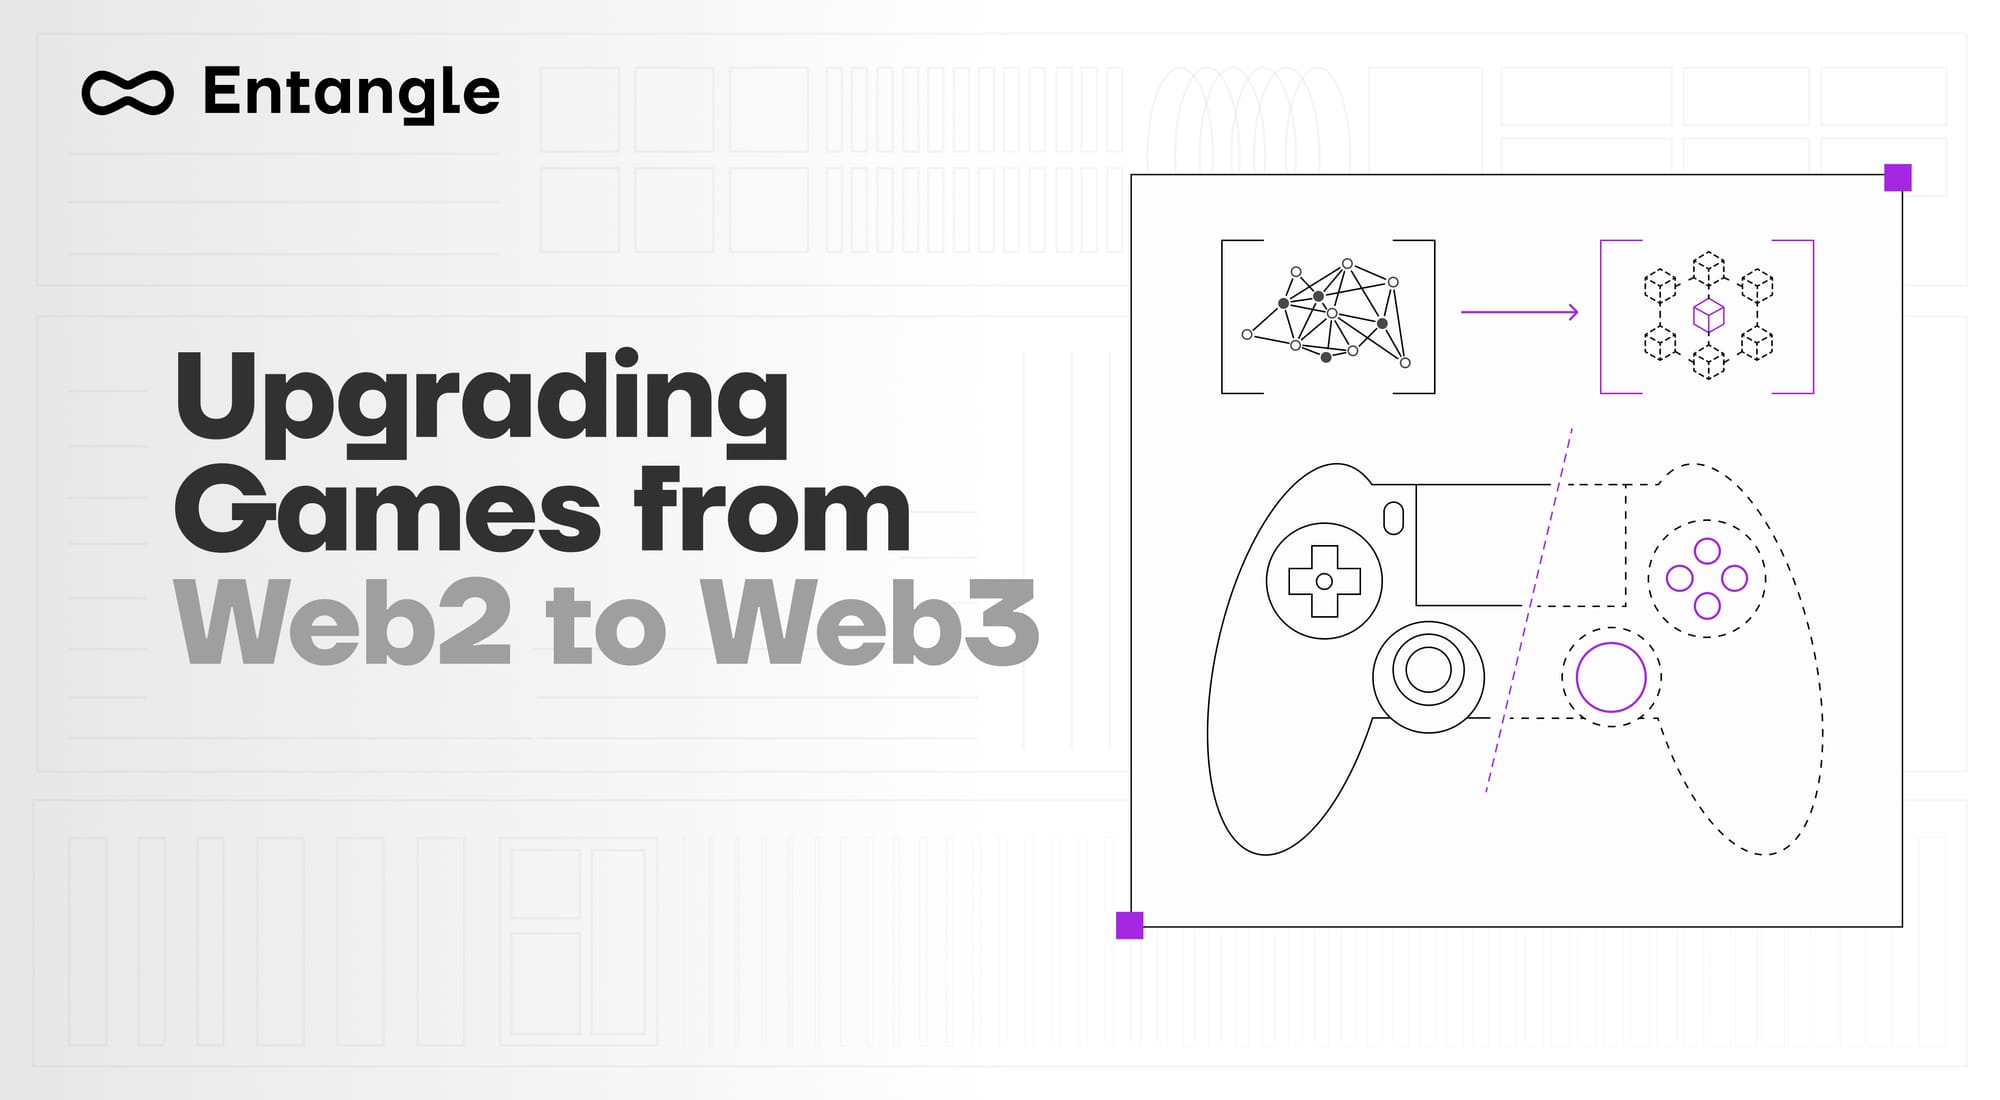 Upgrading Games from Web2 to Web3